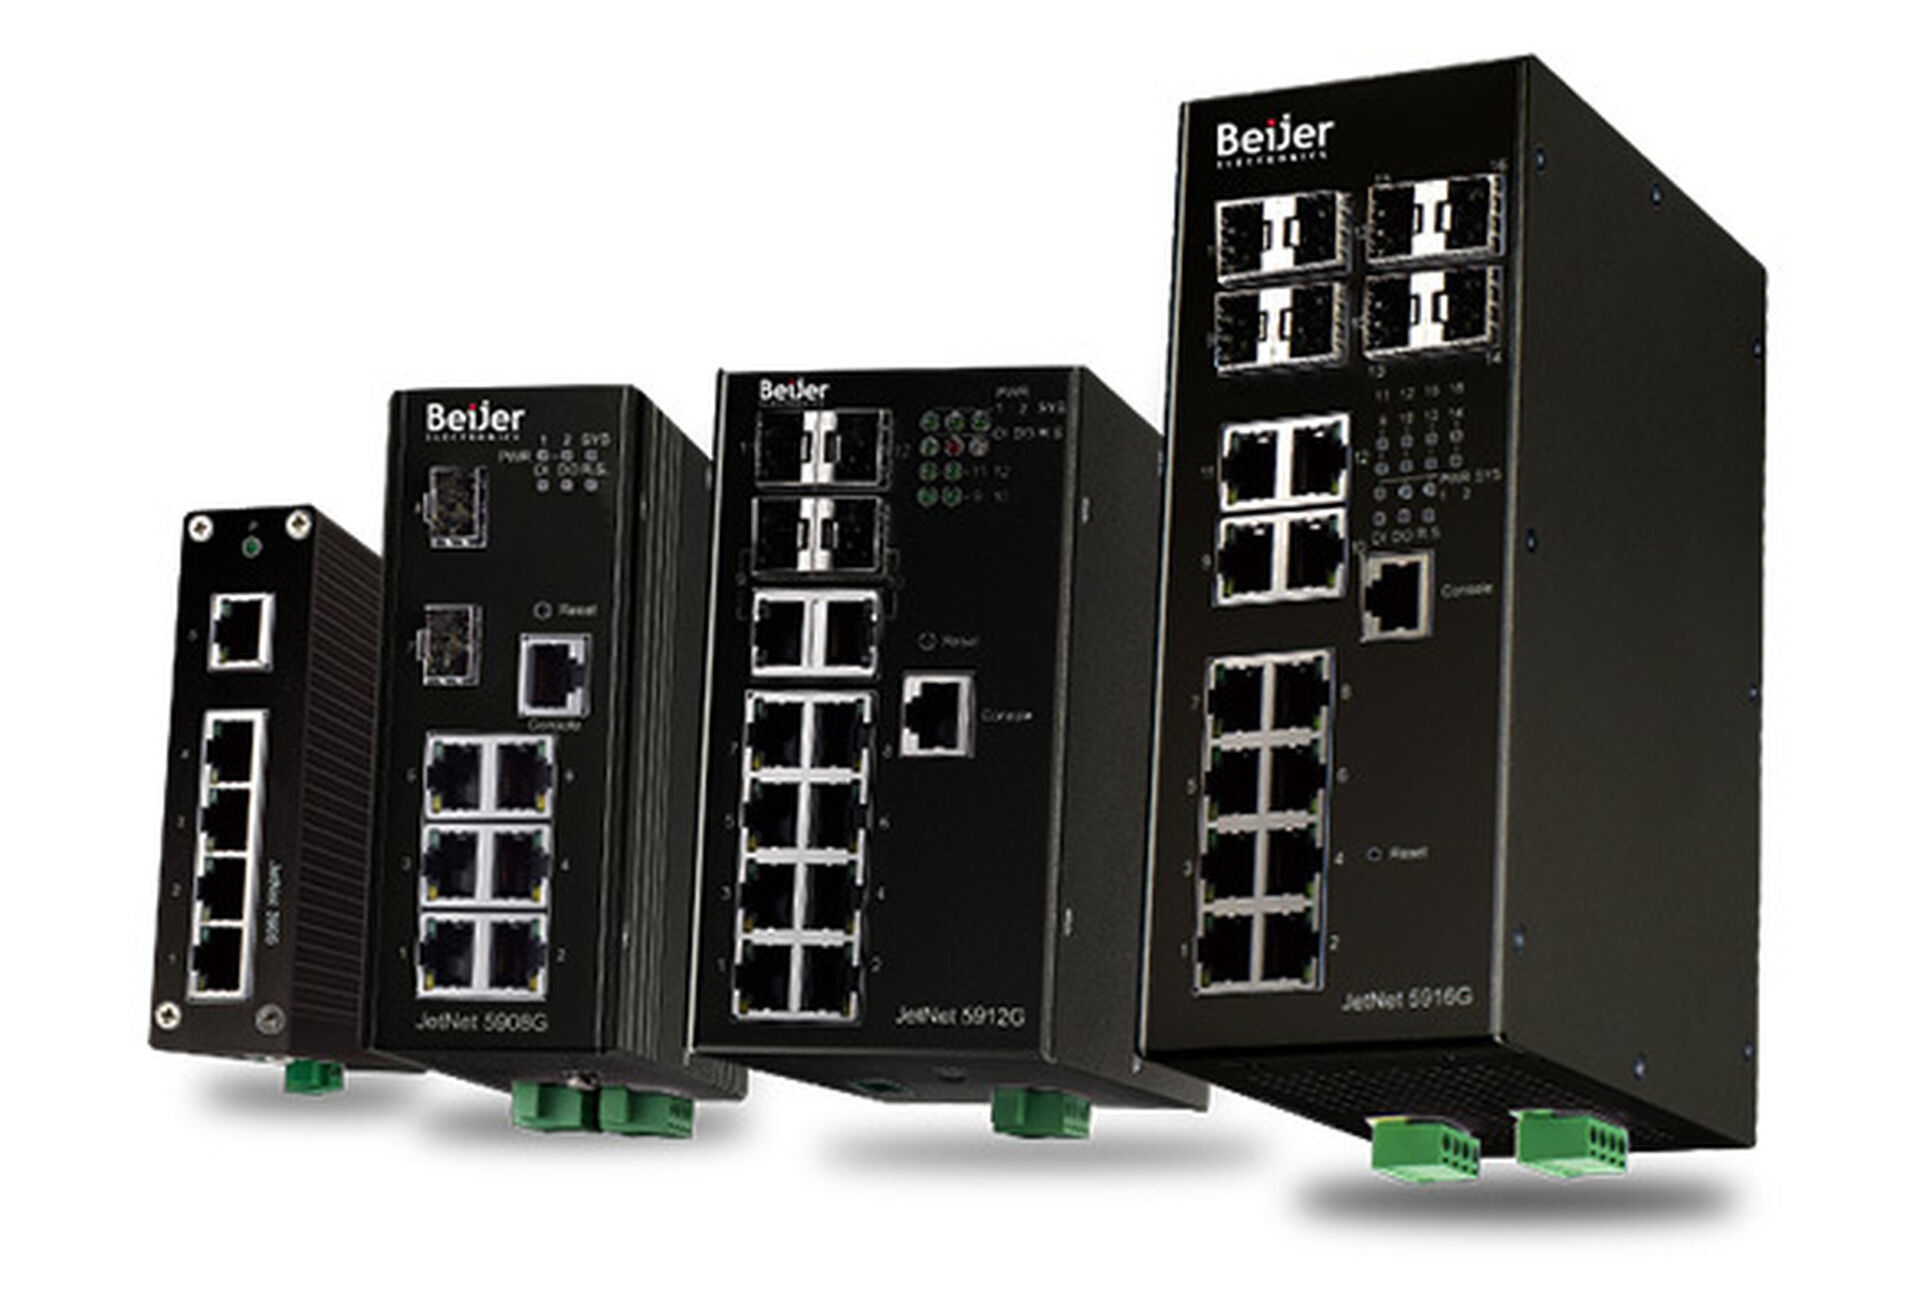 Newly developed DNV approved JetNet 3900/5900 series of industrial Ethernet switches